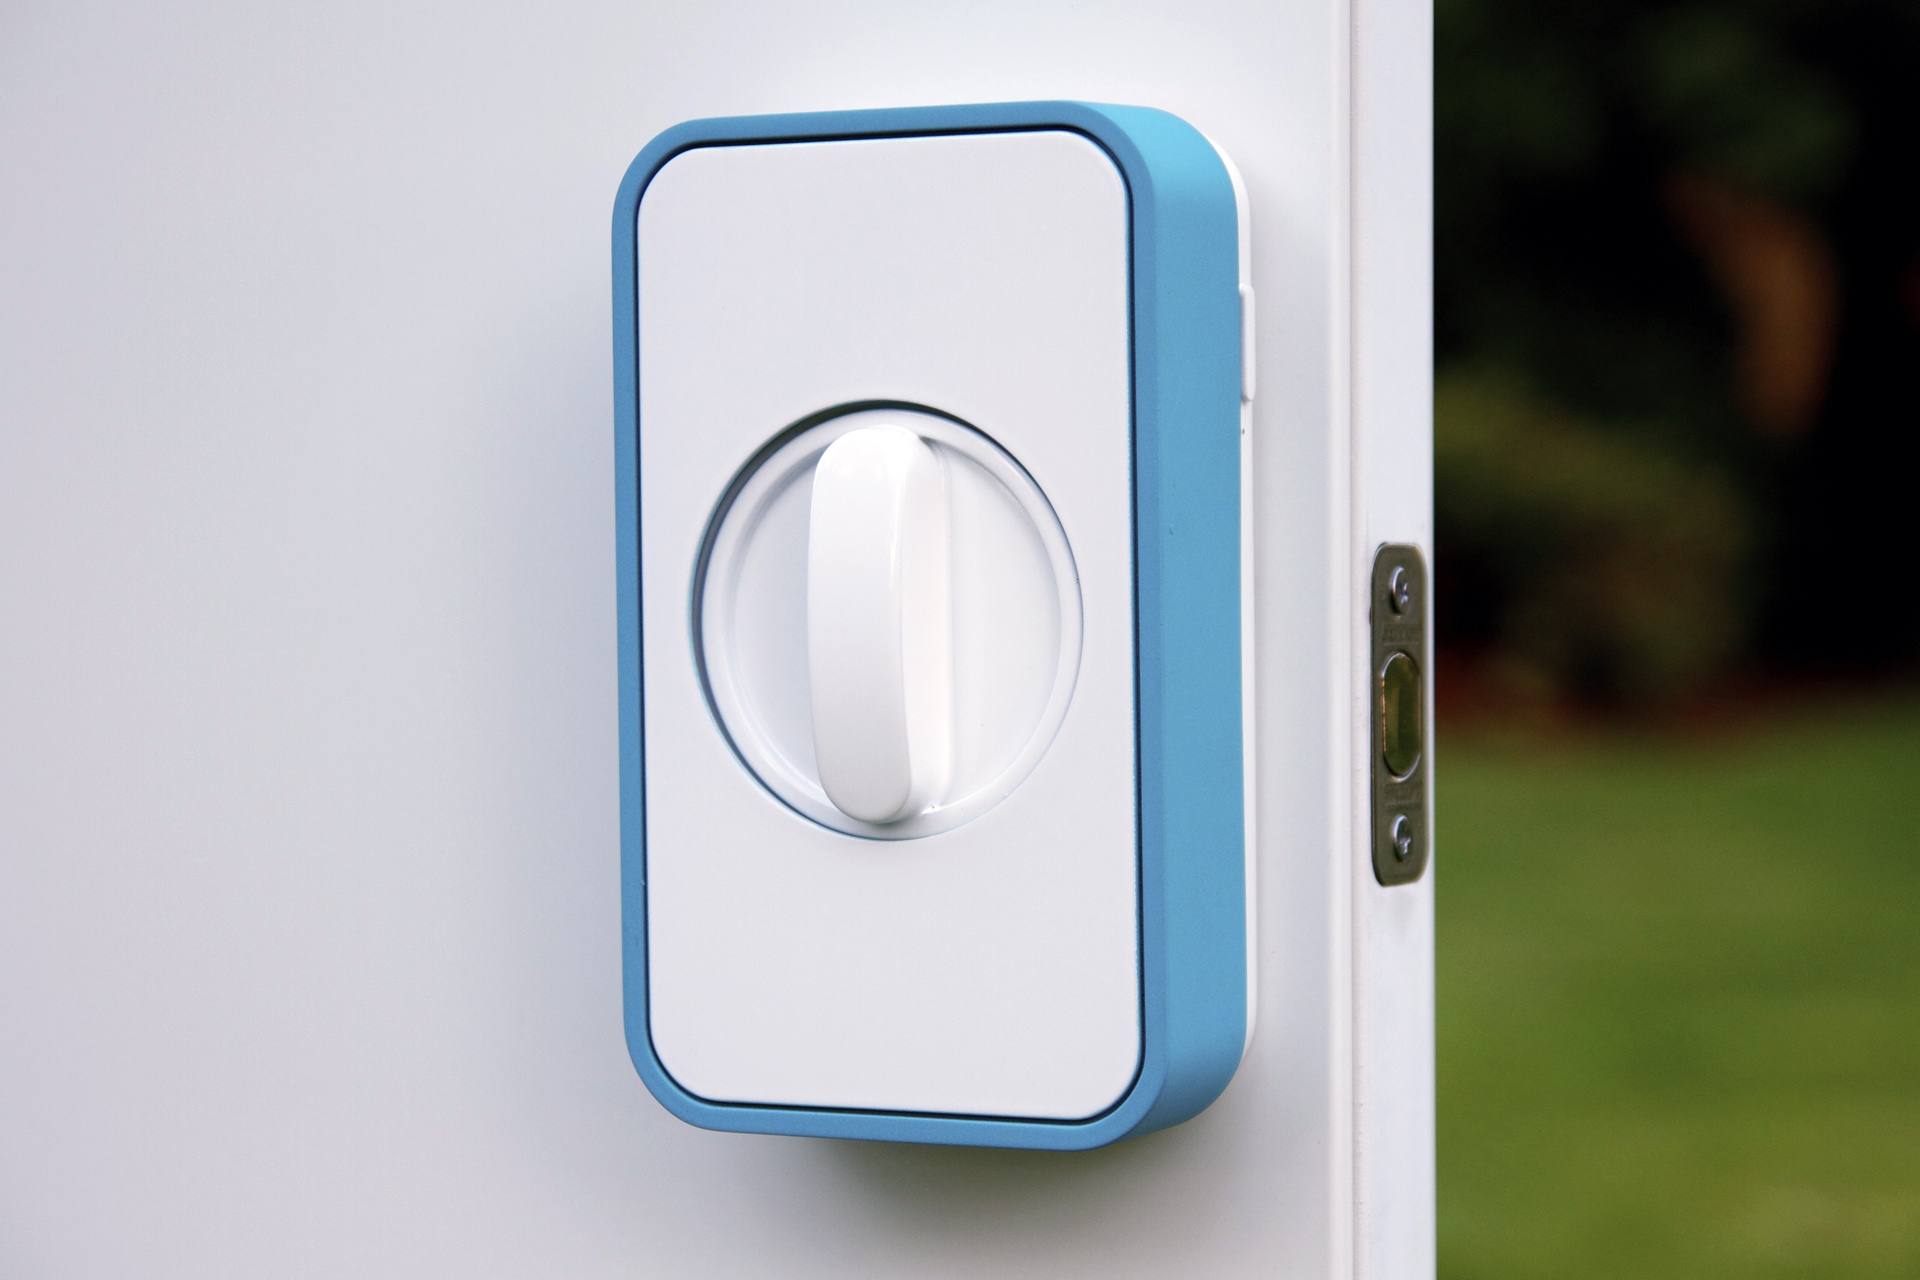 The Lockitron is a lock that lets you unlock your door with a phone. With this worrying that you haven’t locked your door is a thing from the past. It also notifies you if your door has been opened. So even if you’re on the other side of the world you’ll know your door is safely locked.